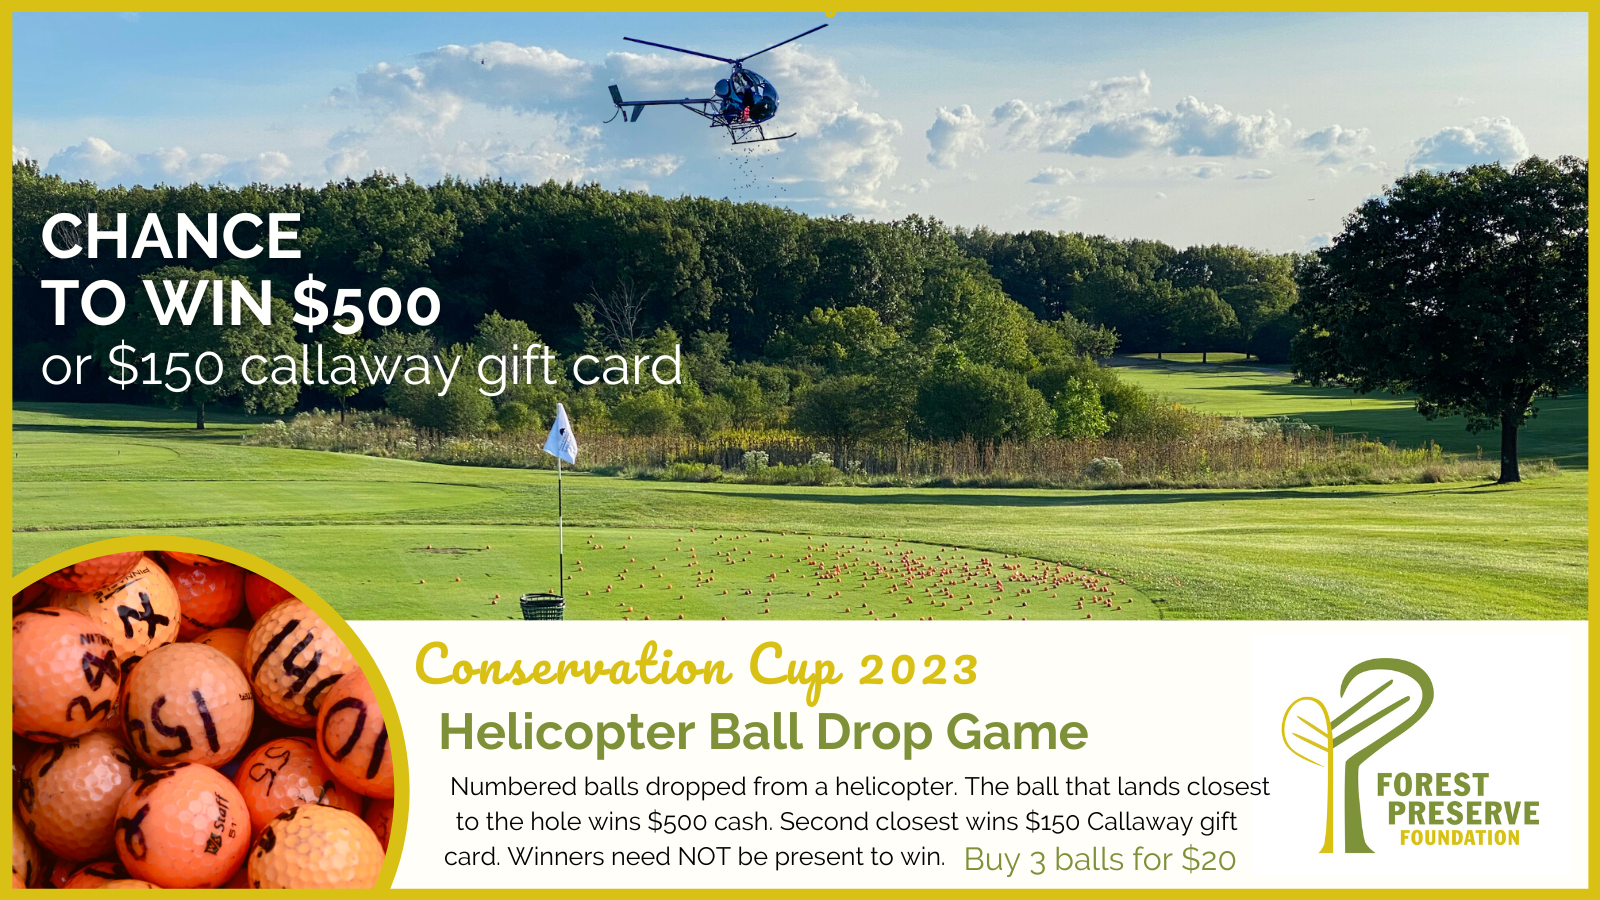 Graphic with a helicopter over a golfcourse and orange balls on the ground with copy that reads: Chance to win $500 or $150 callaway gift card Helicopter Ball Drop Game Numbered balls dropped from a helicopter. The ball that lands closest to the hole wins $500 cash. Second closest wins $150 Callaway gift card. Winners need NOT be present to win. Buy 3 balls for $20